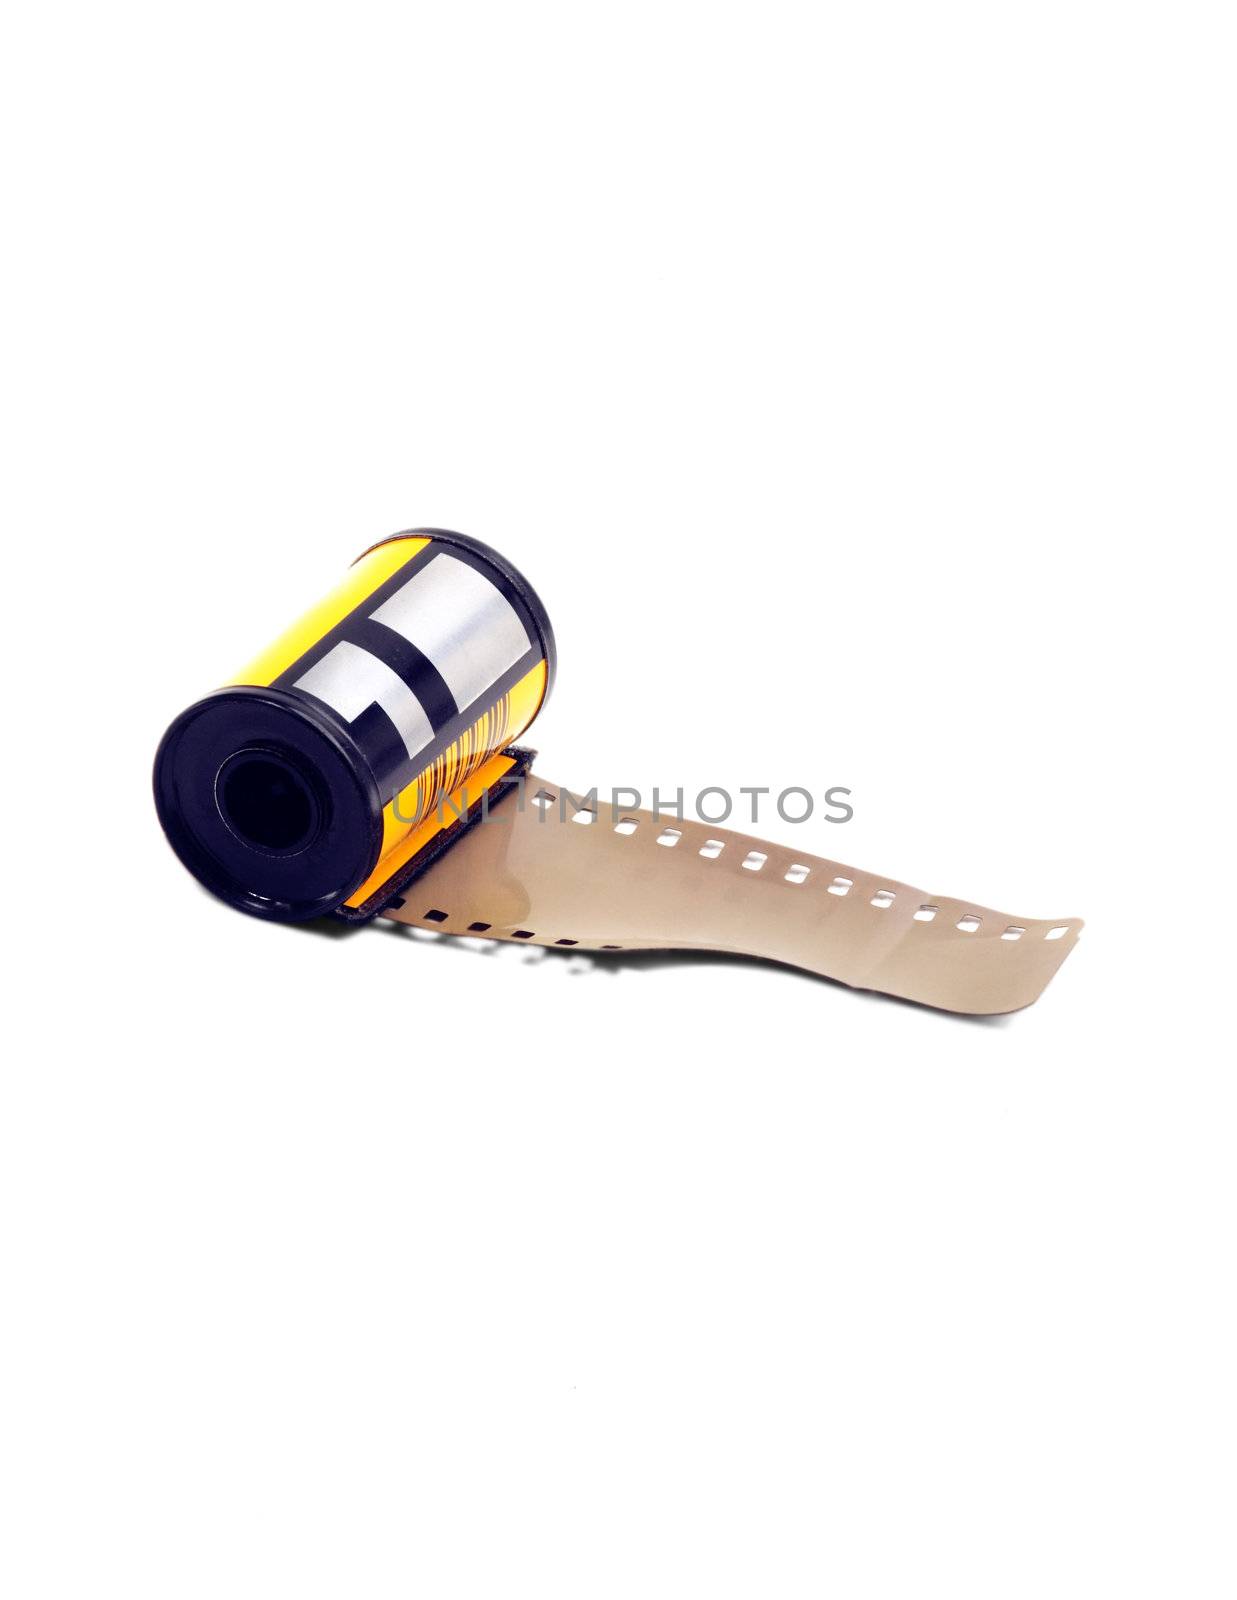 35mm roll film canister on white background